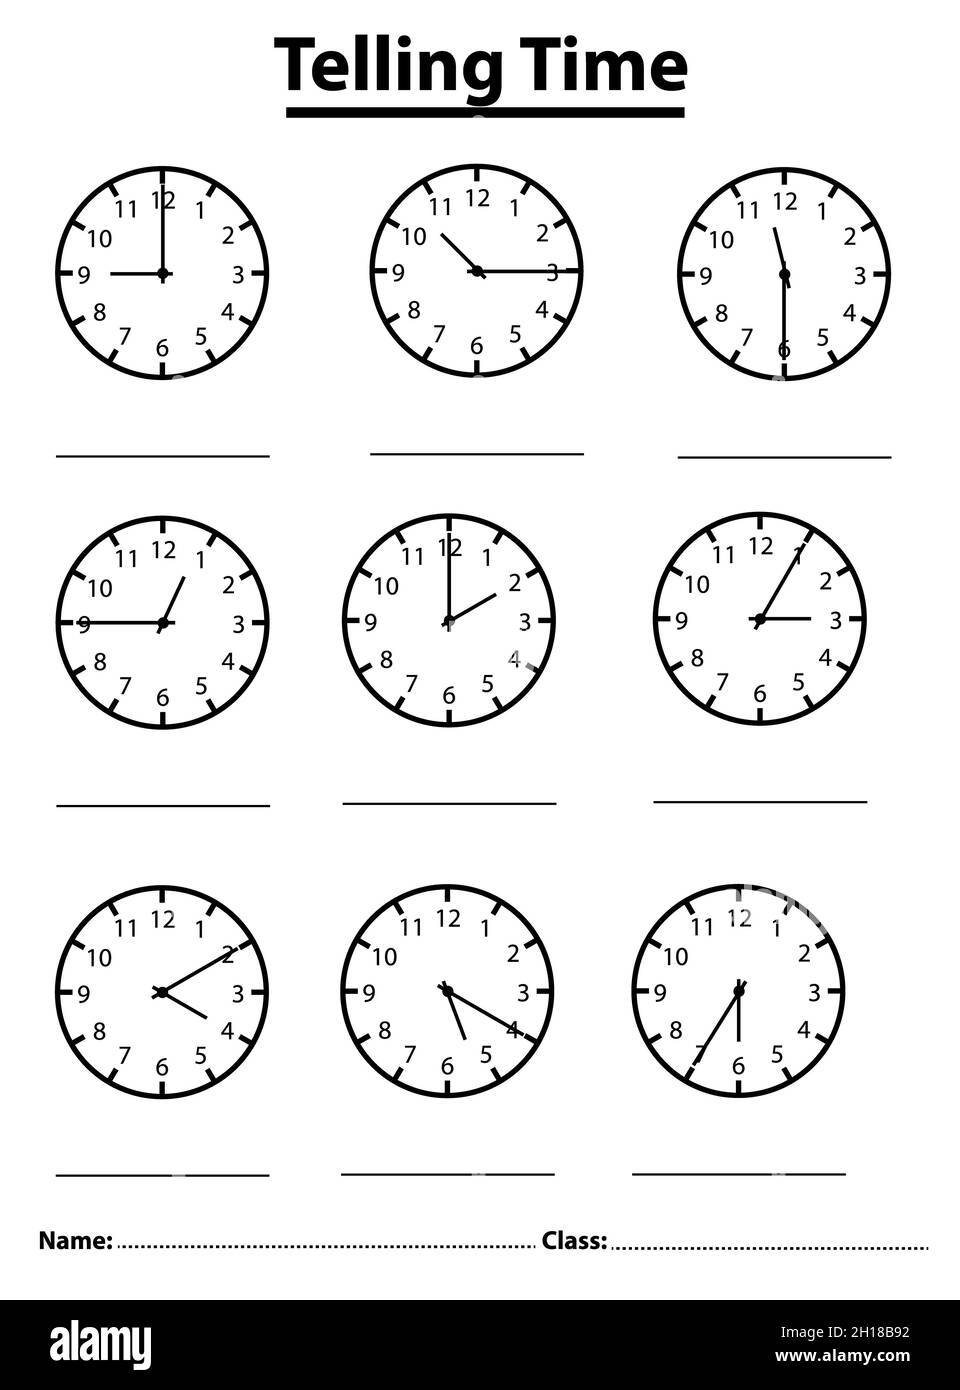 telling-time-worksheet-for-pre-school-kids-game-for-child-write-time